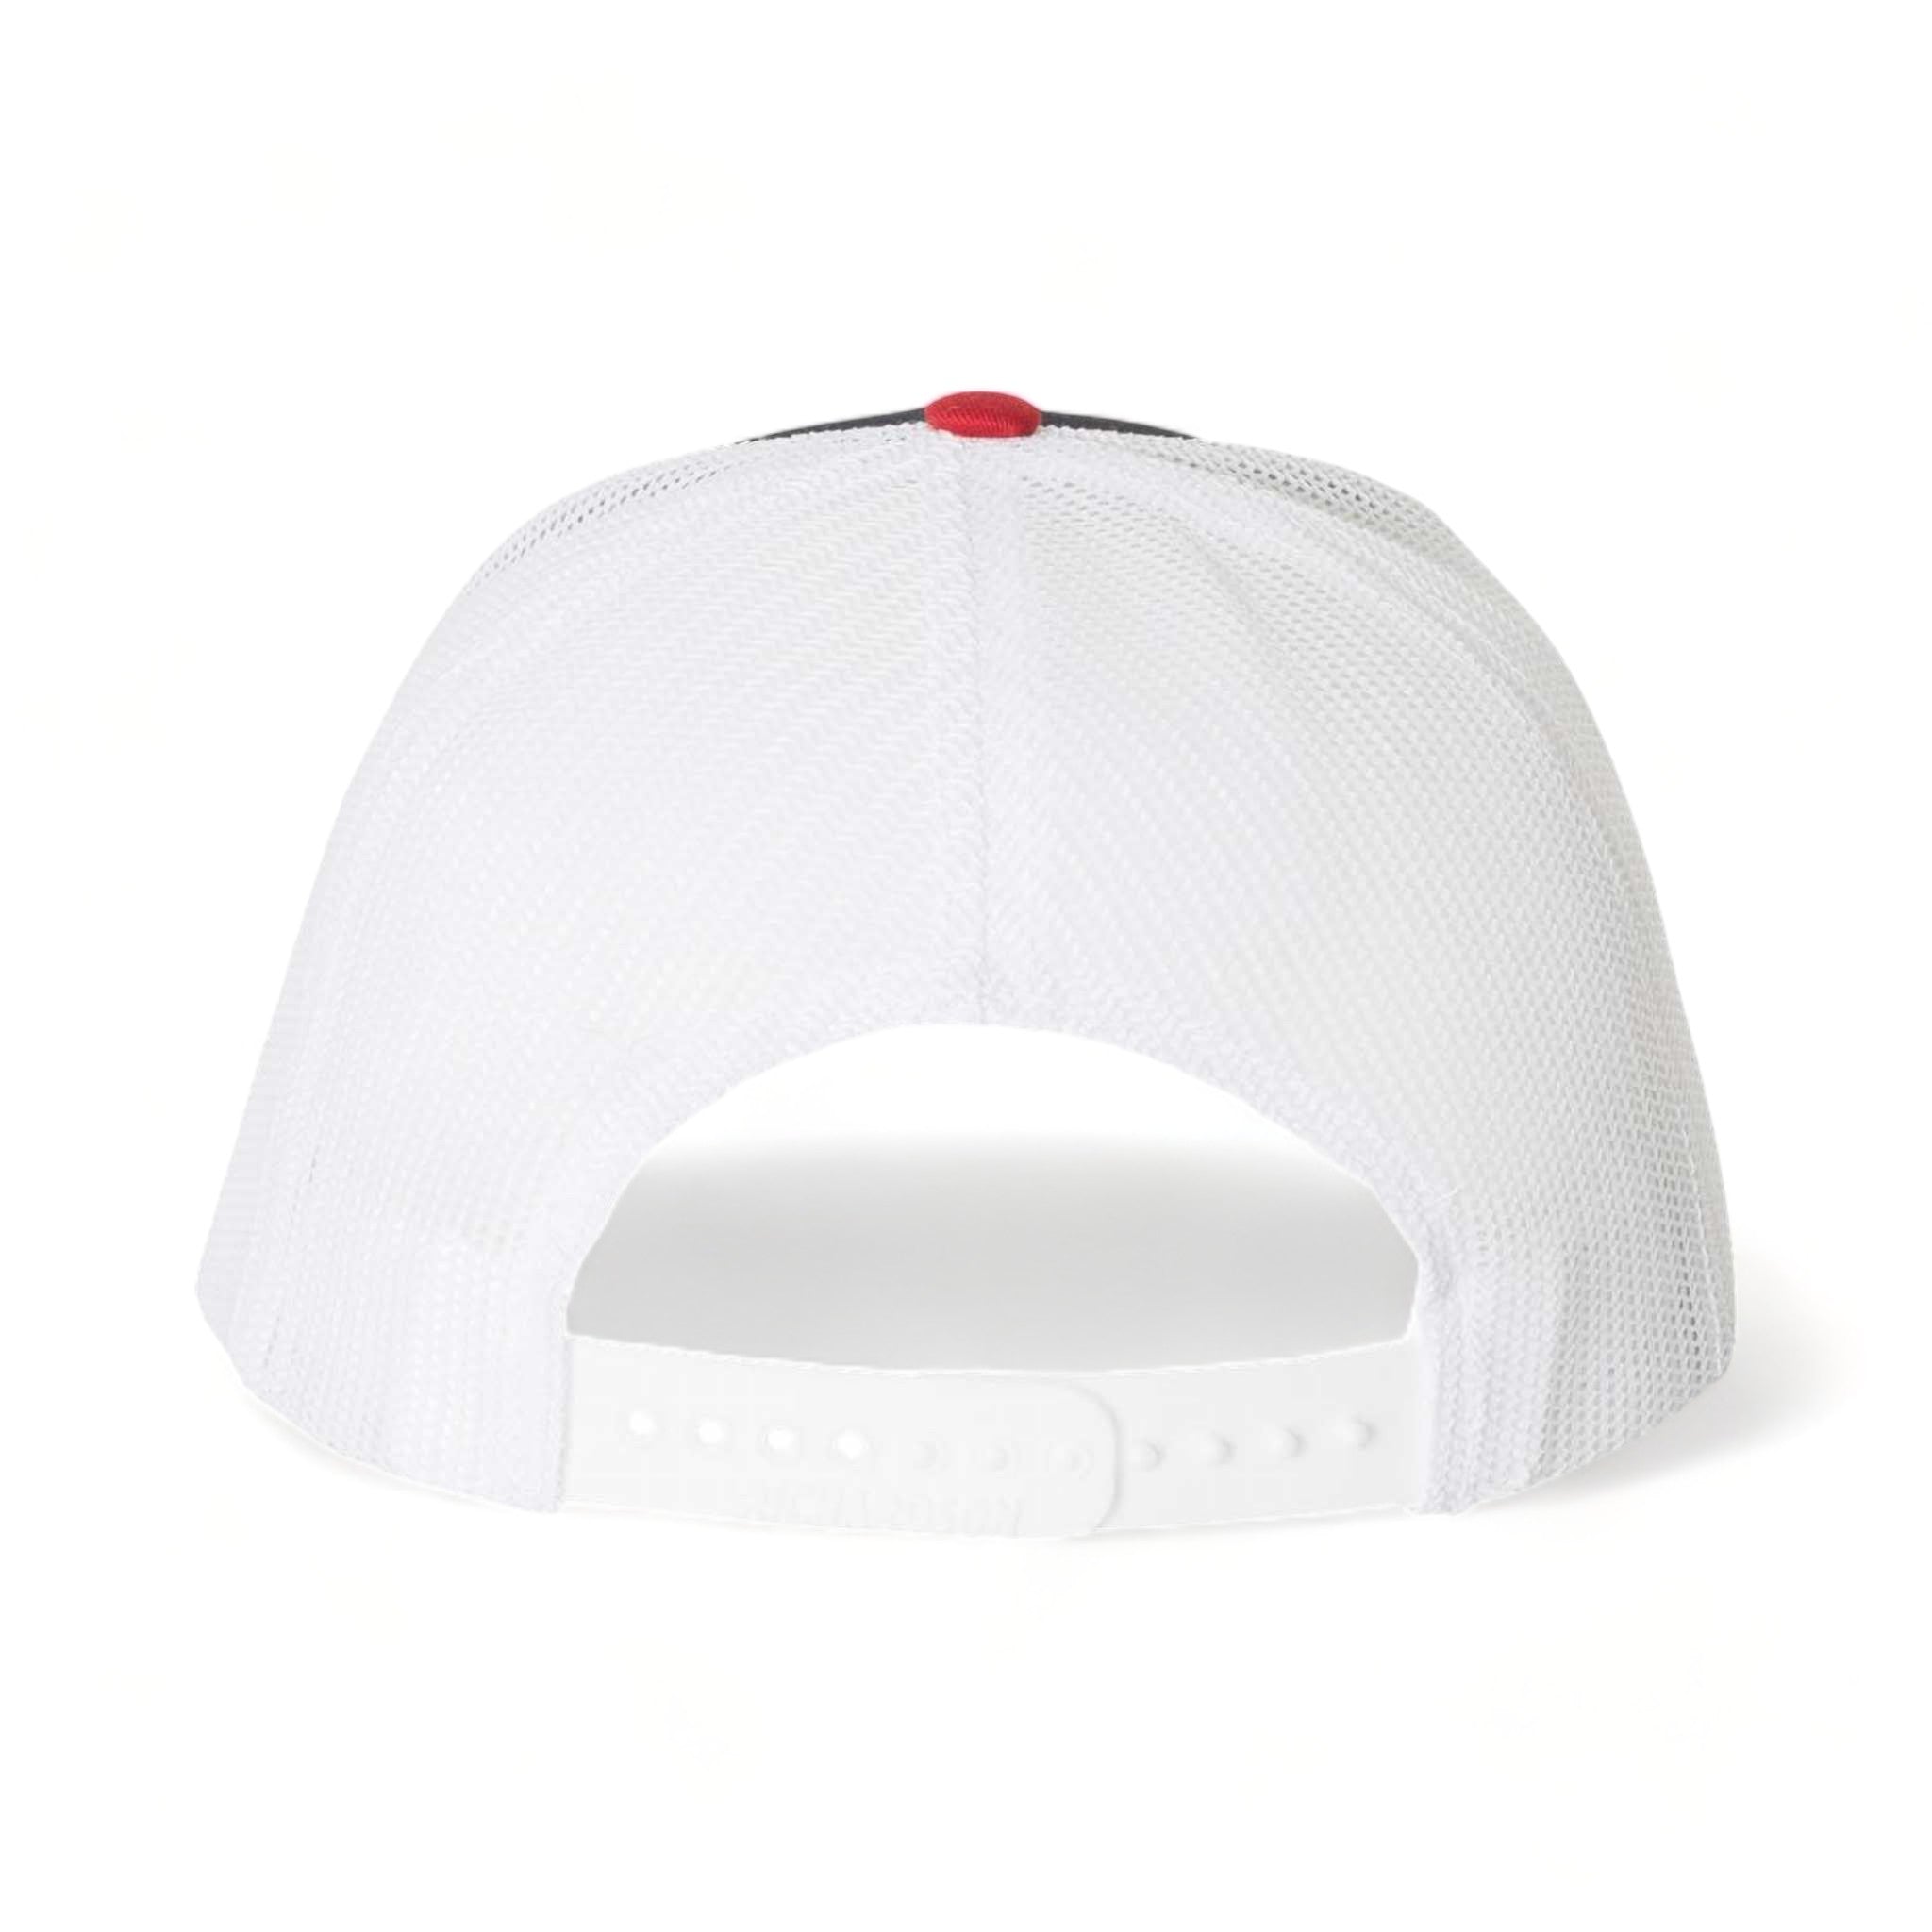 Back view of Richardson 112 custom hat in navy, white and red